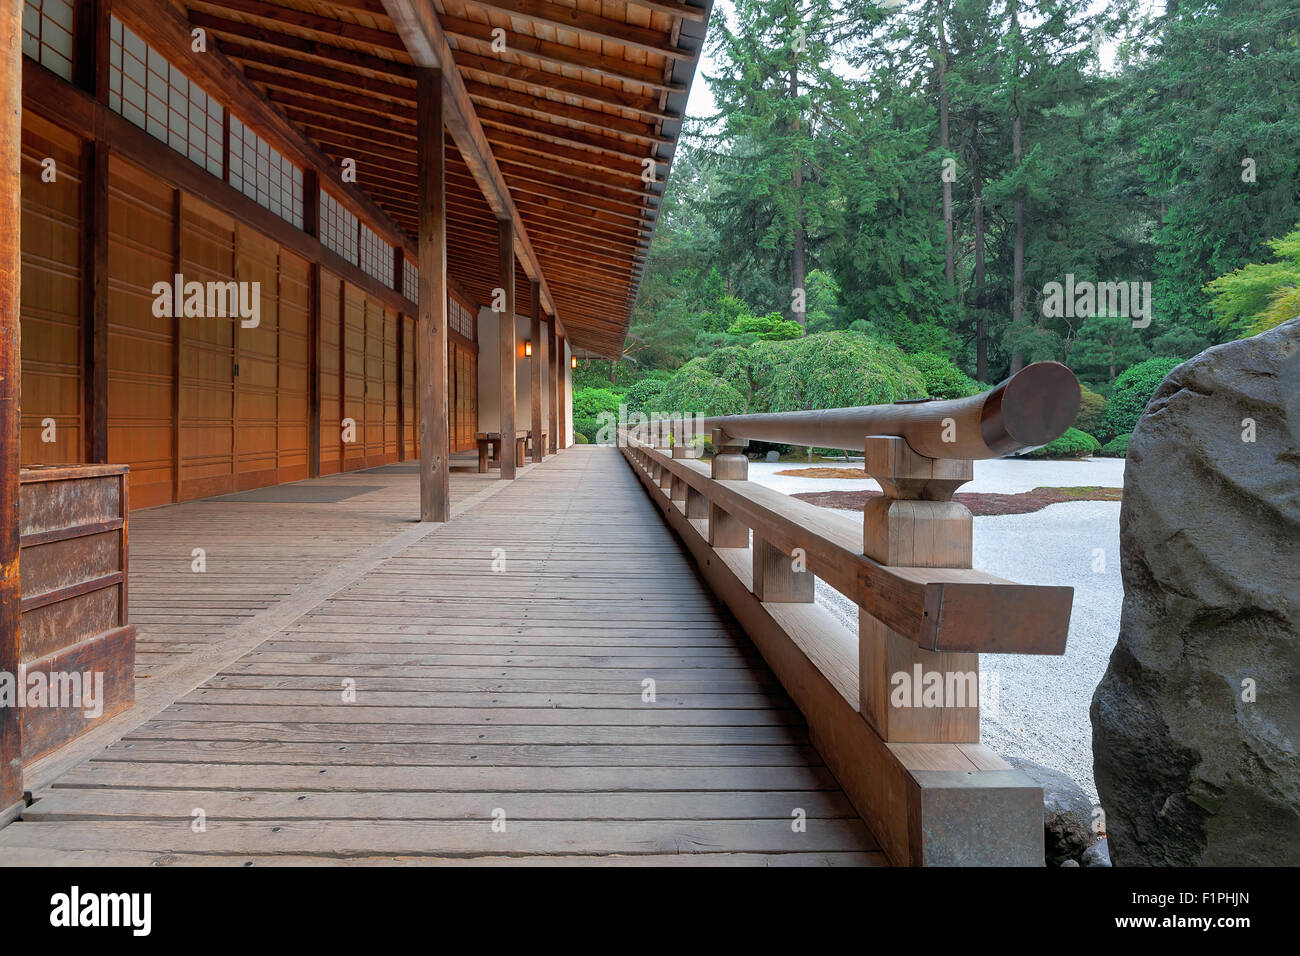 The Pavilion and Sand Garden at Japanese Garden Stock Photo